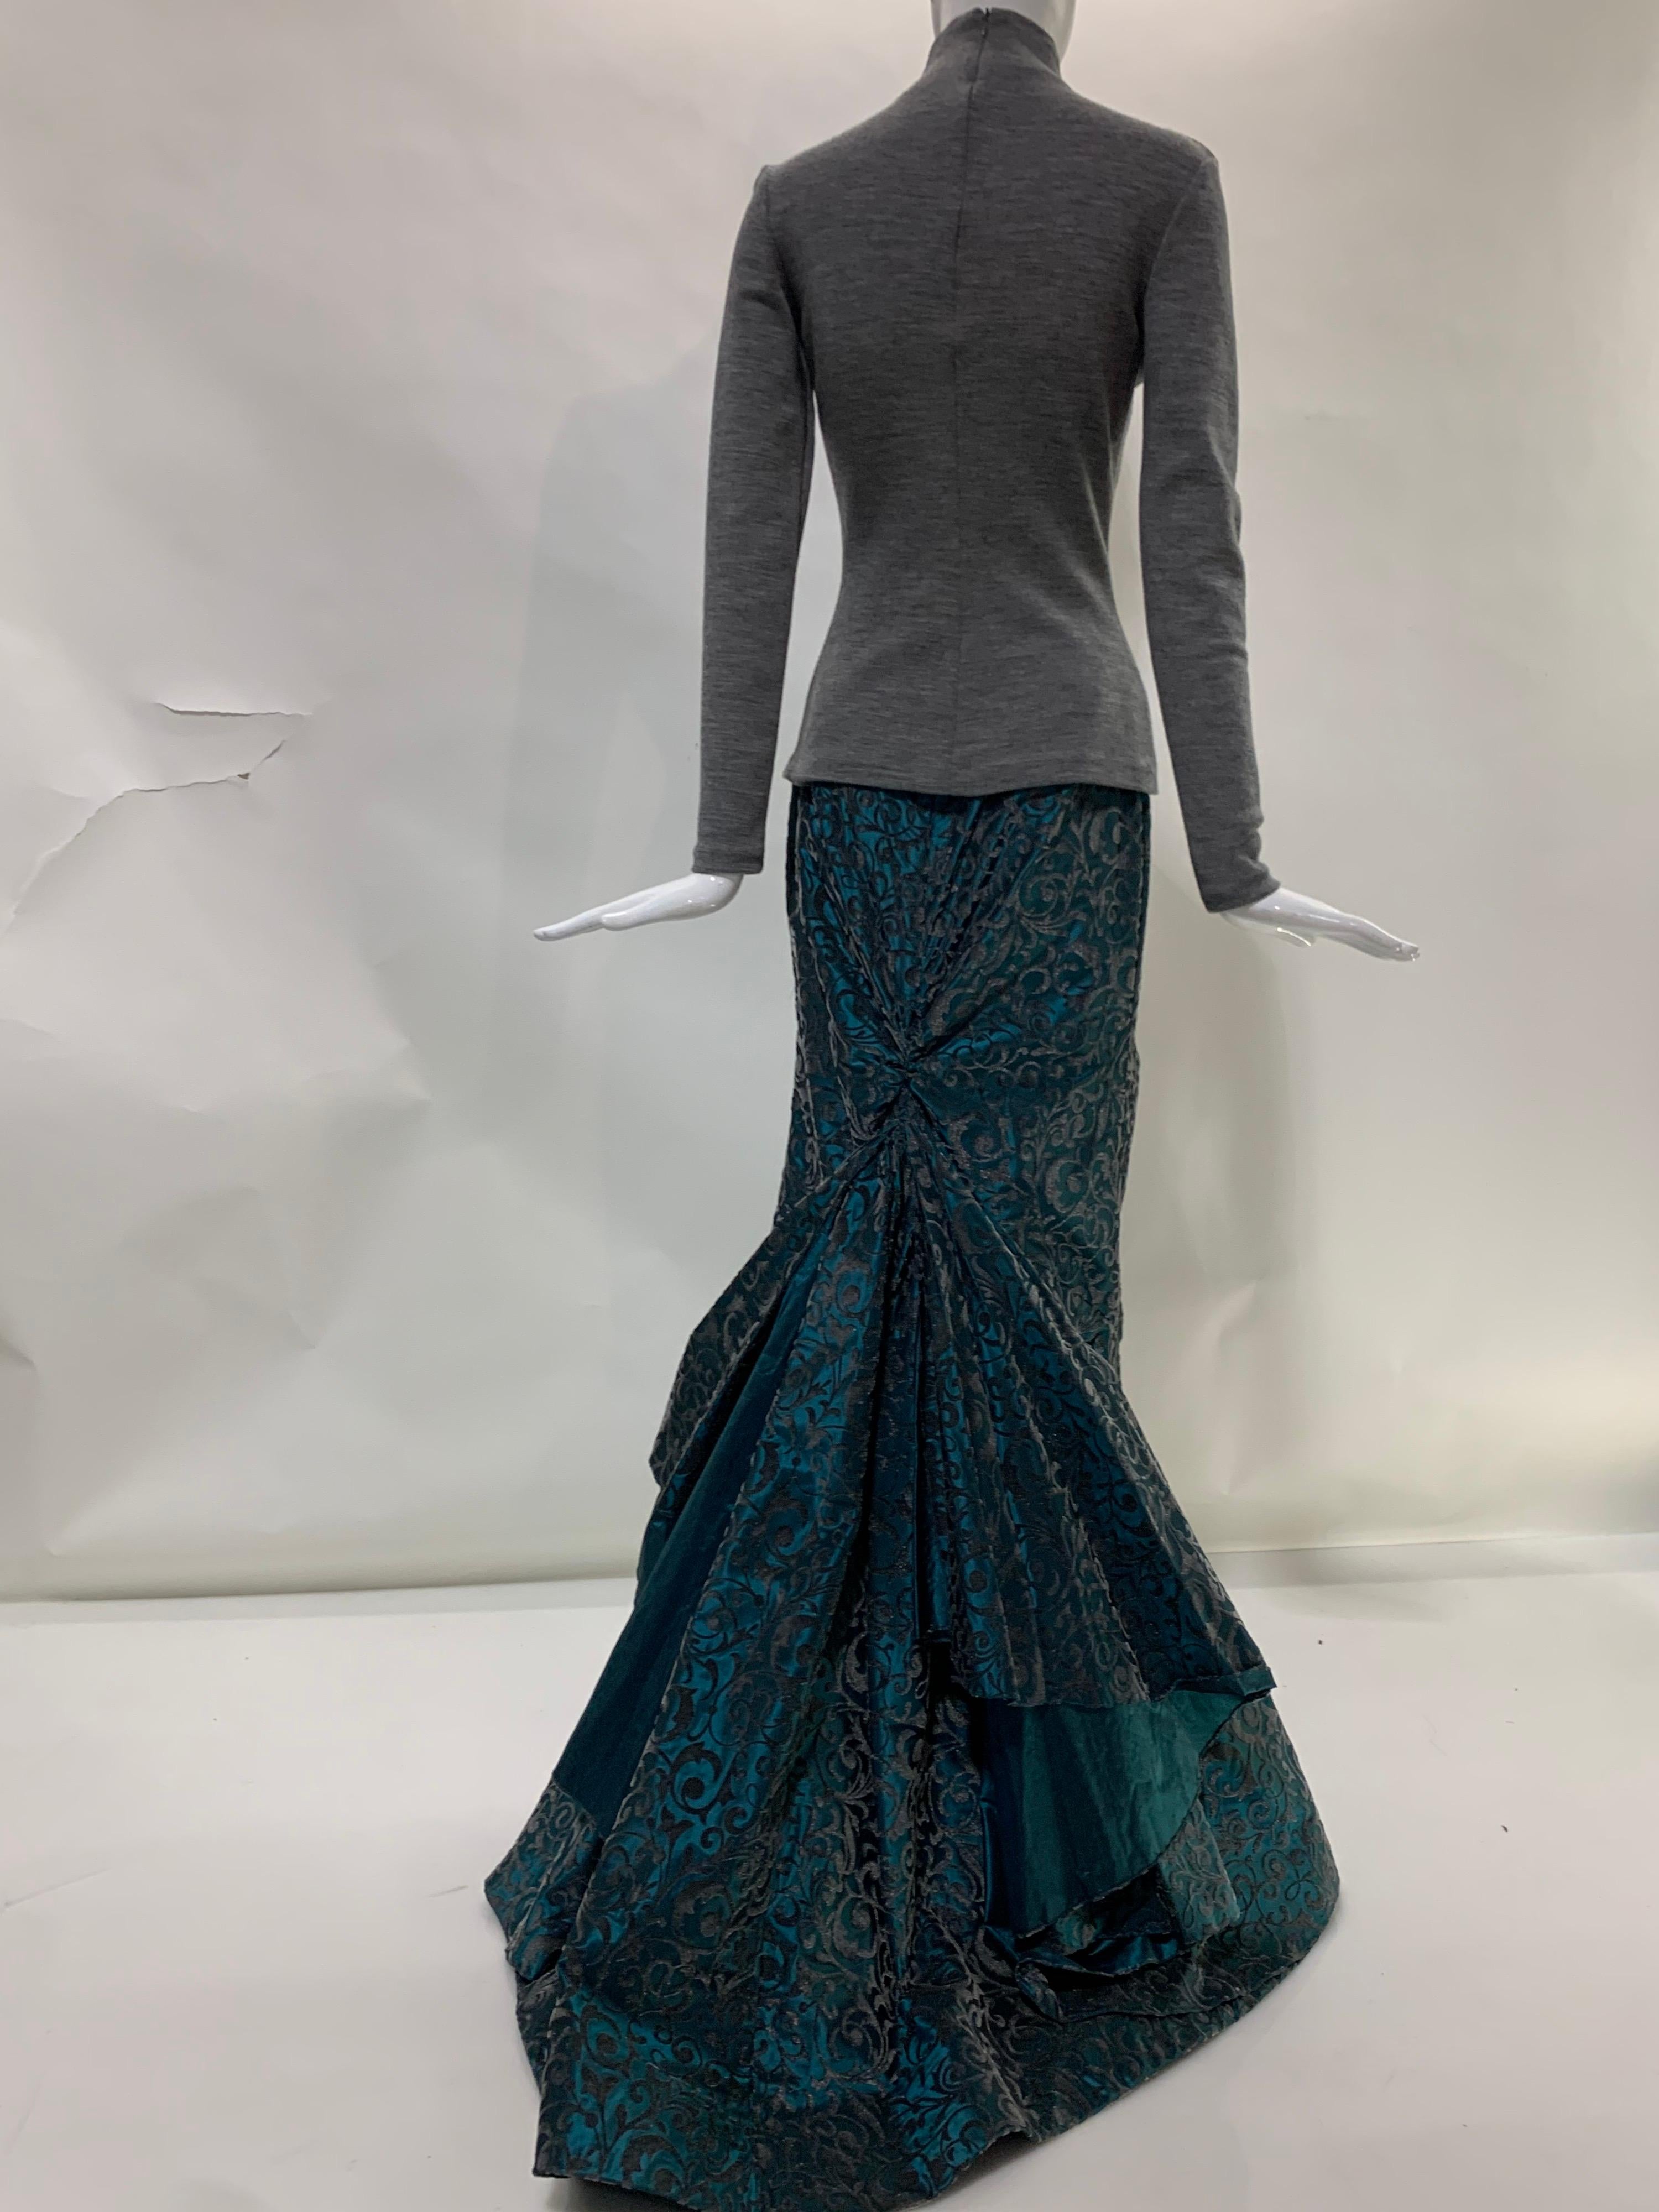 1990 Couture Grey Italian Wool Sweater & Teal Taffeta Train Formal Skirt Set In Excellent Condition For Sale In Gresham, OR